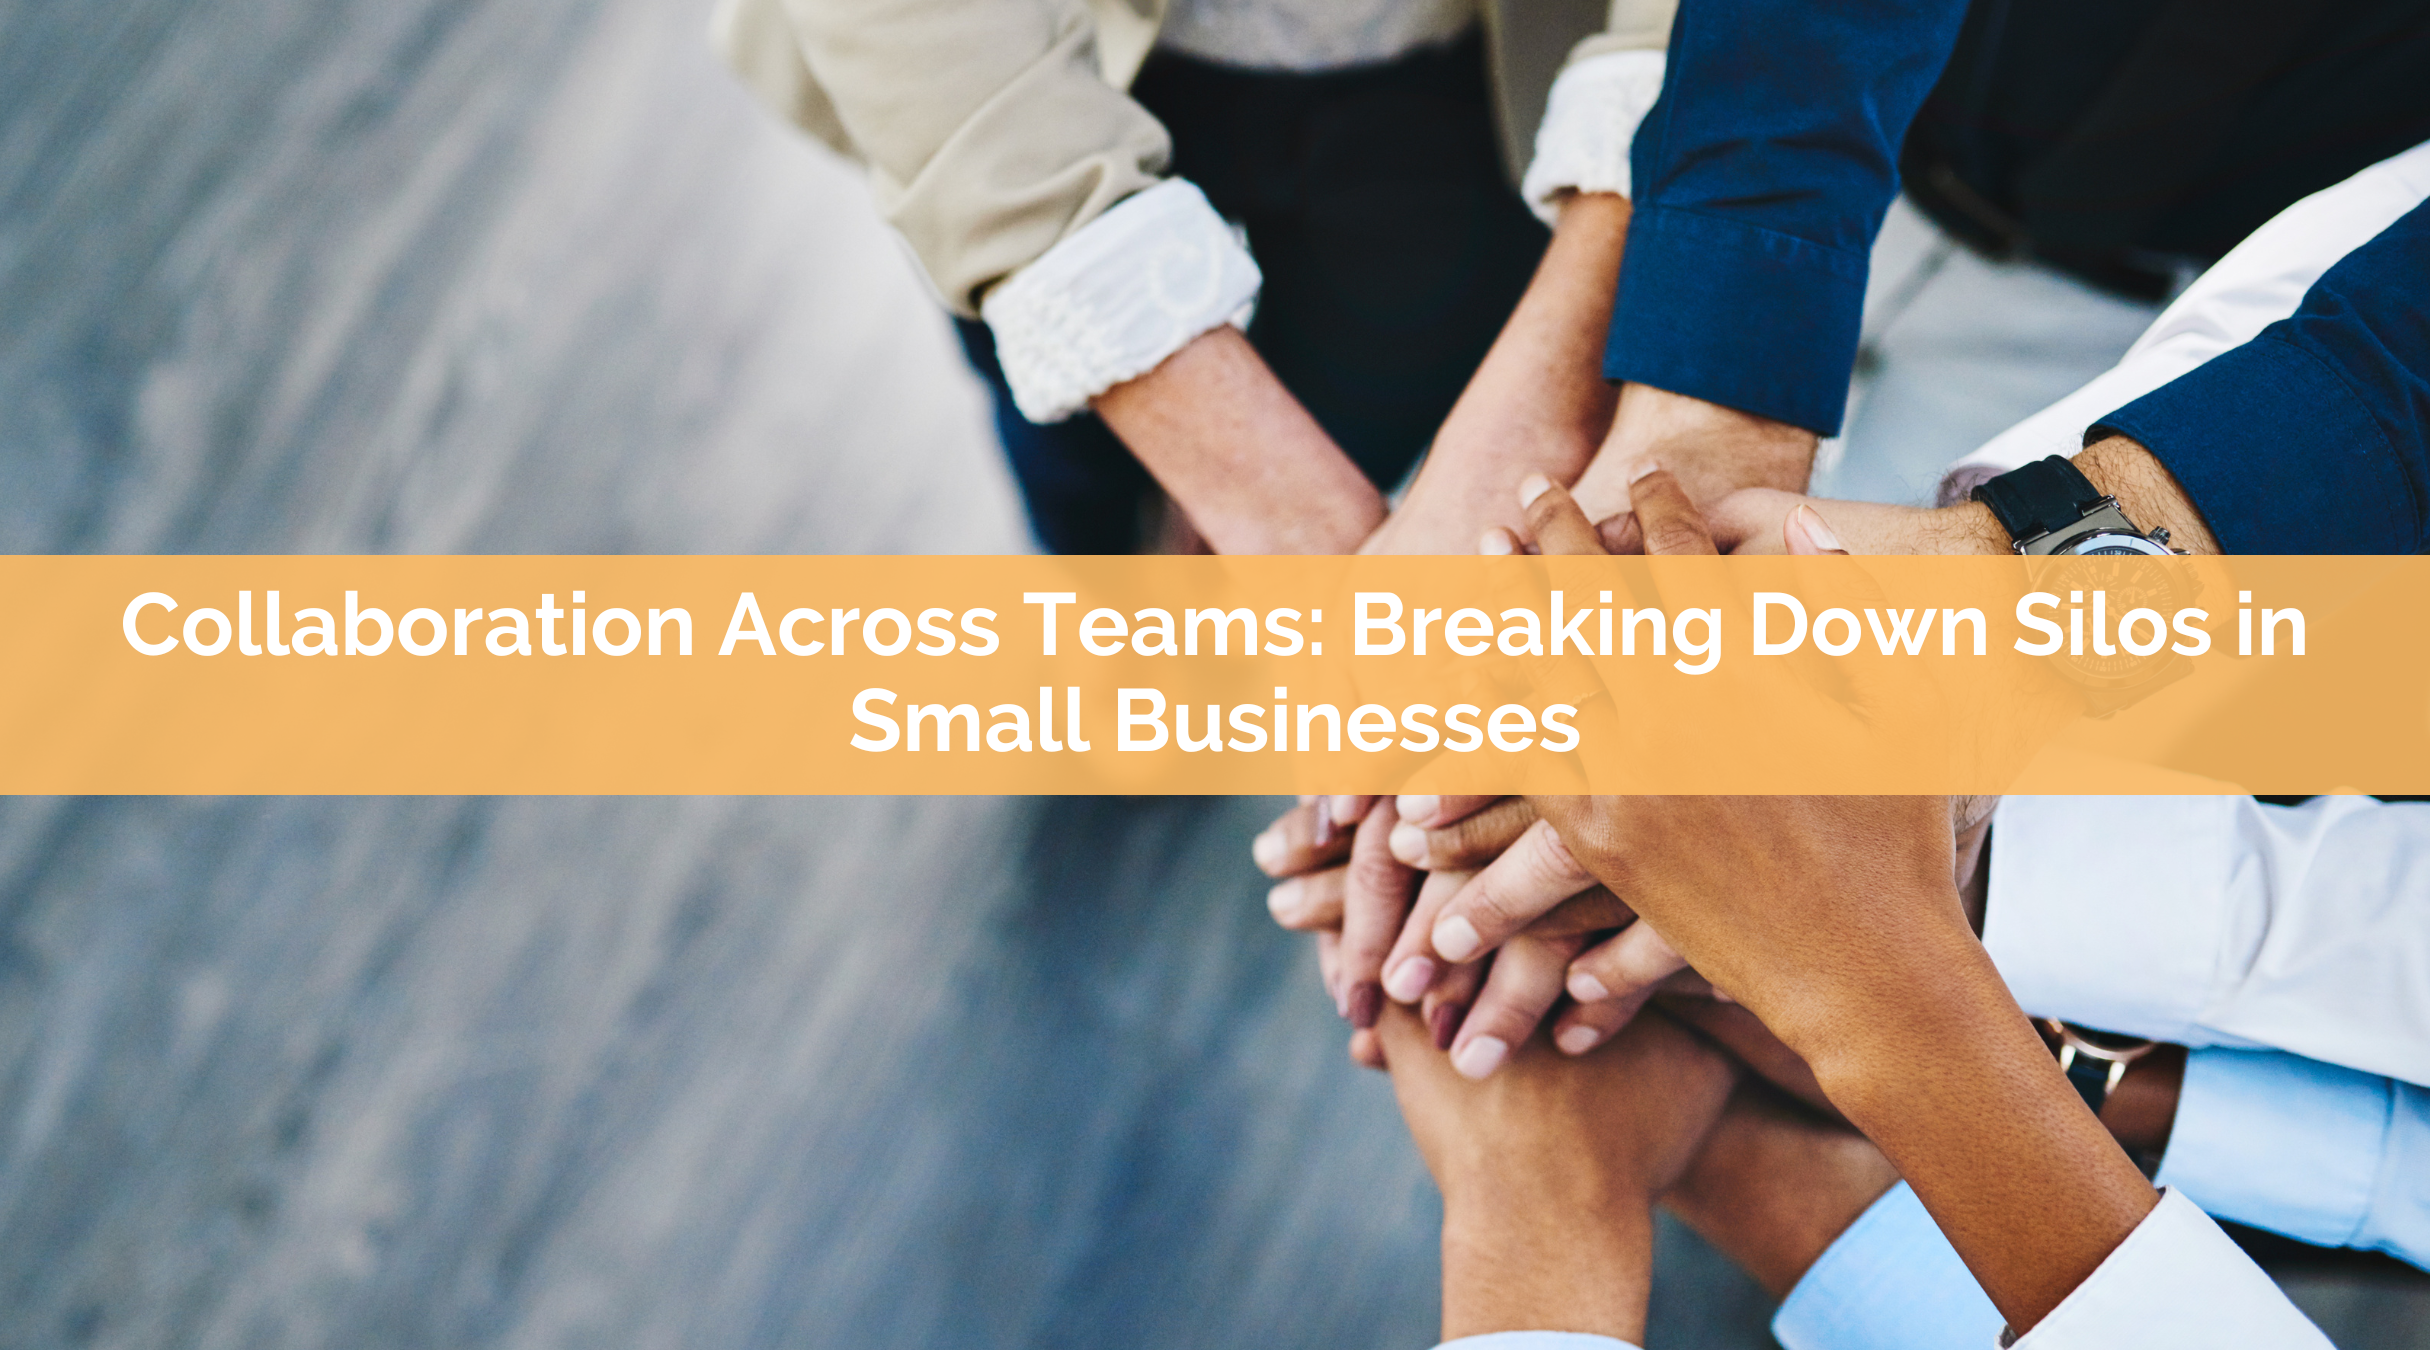 Collaboration Across Teams: Breaking Down Silos in Small Businesses